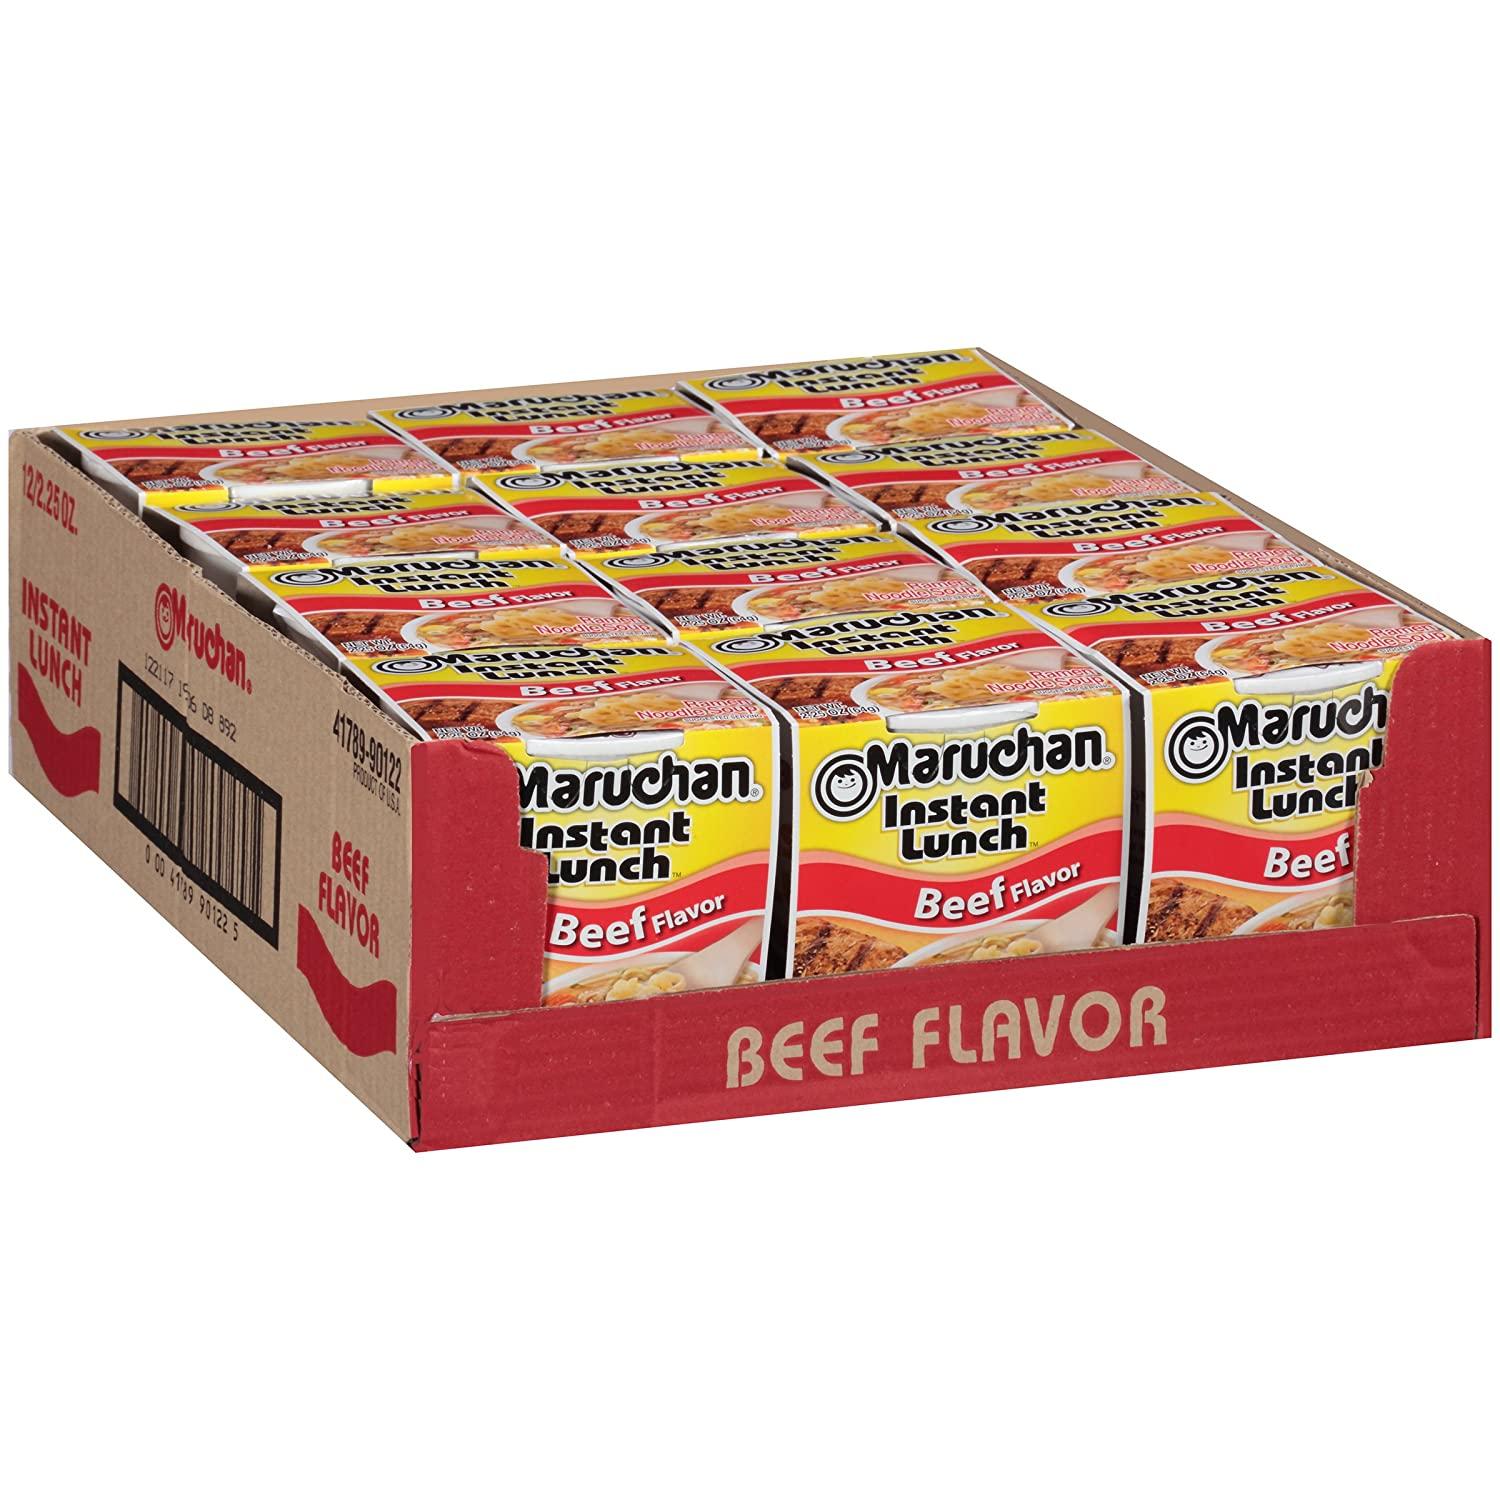 12 Maruchan Instant Lunch Beef Chicken Cup Noodle for $3.36 Shipped